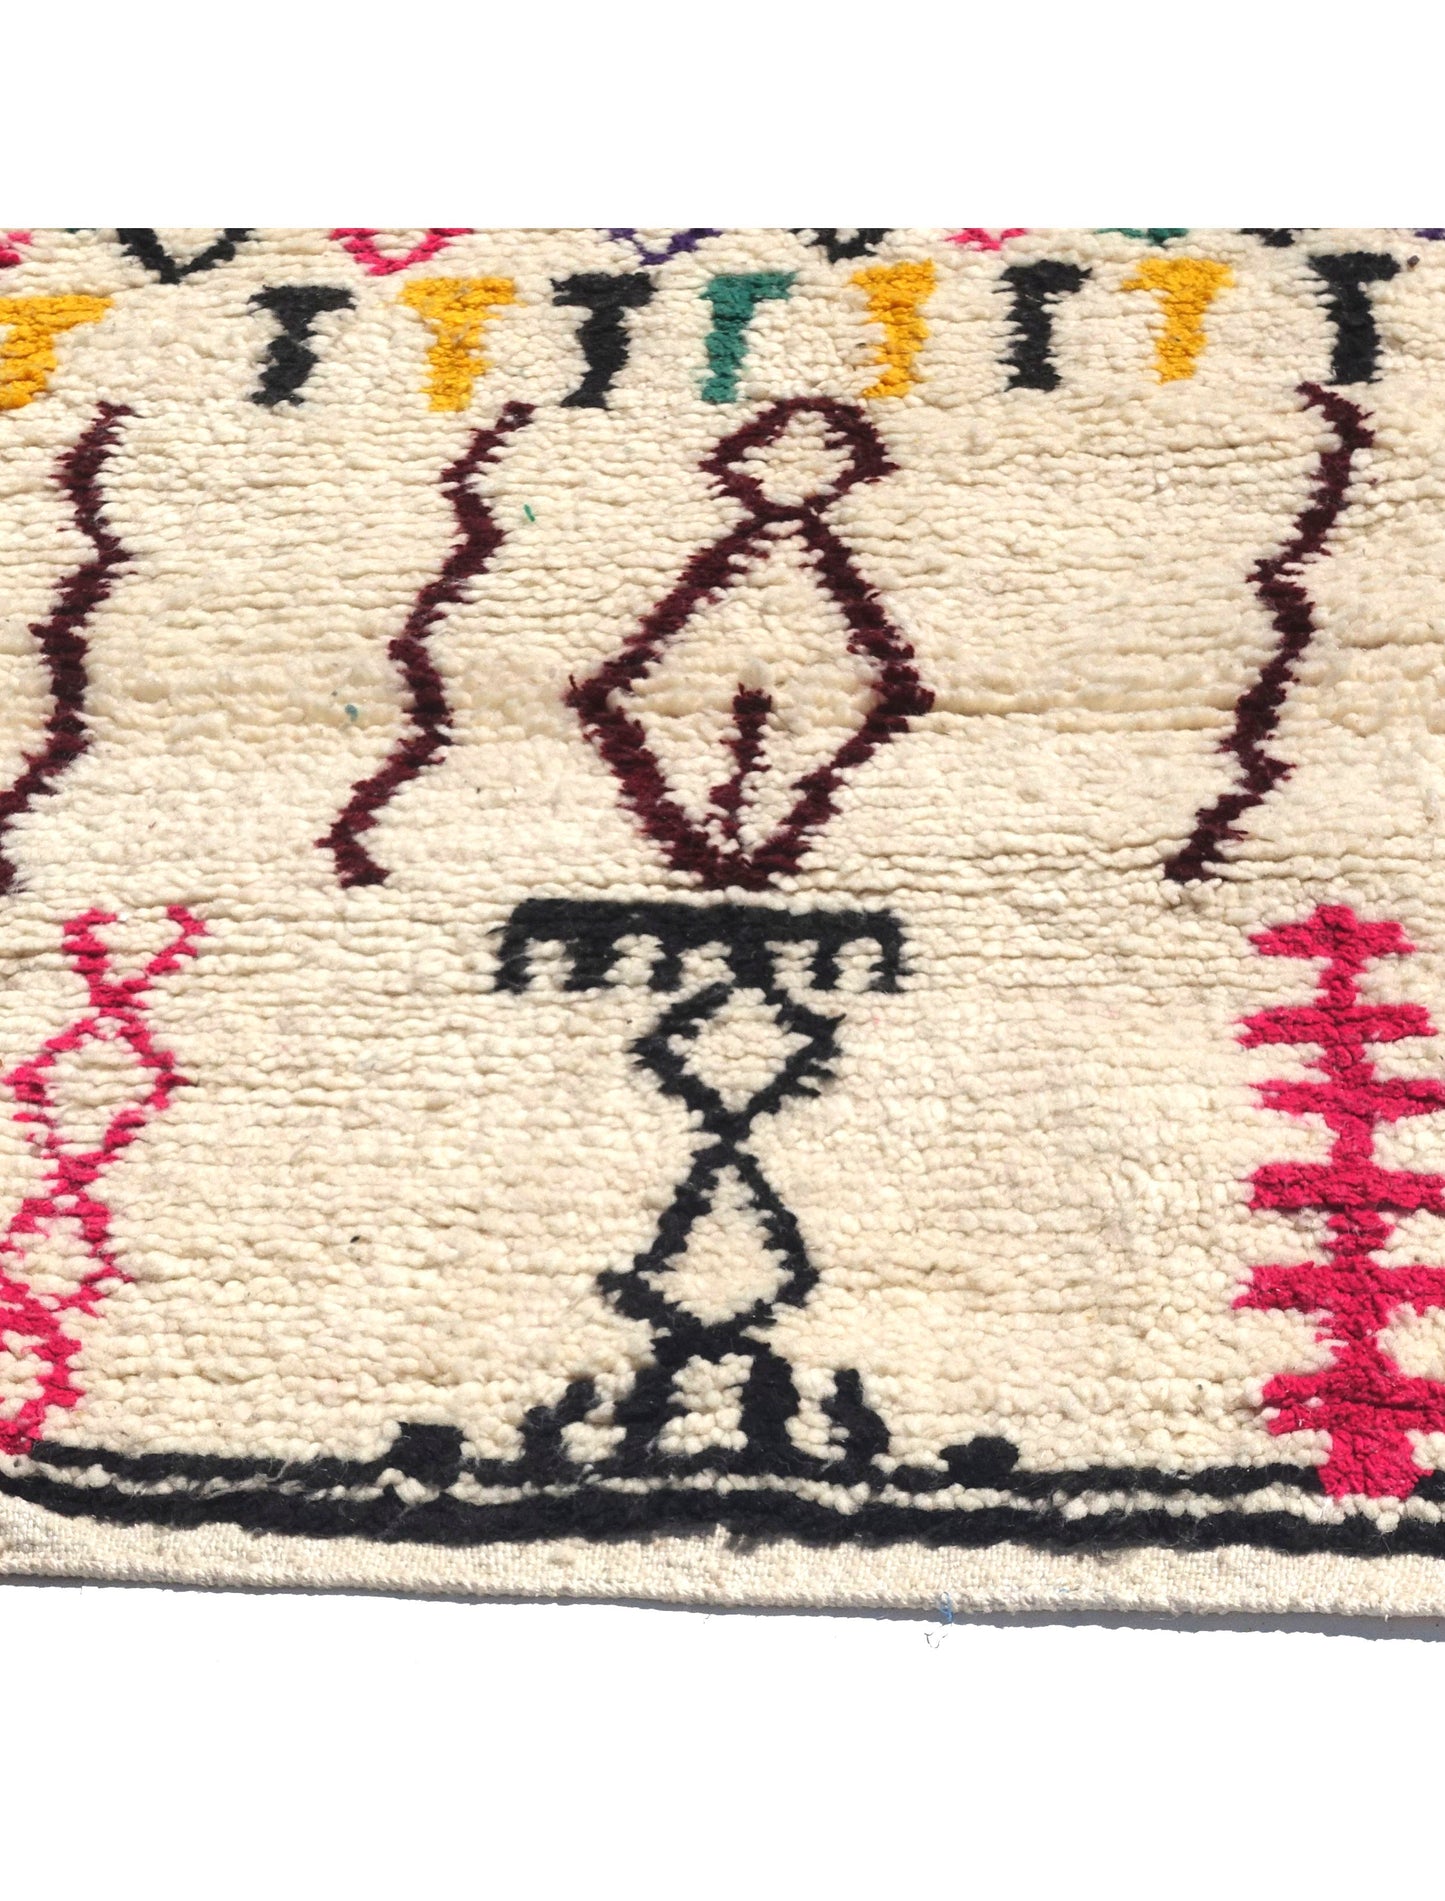 moroccanrugs, carpets, rugs, area rugs, ruggable rugs, outdoor rugs,